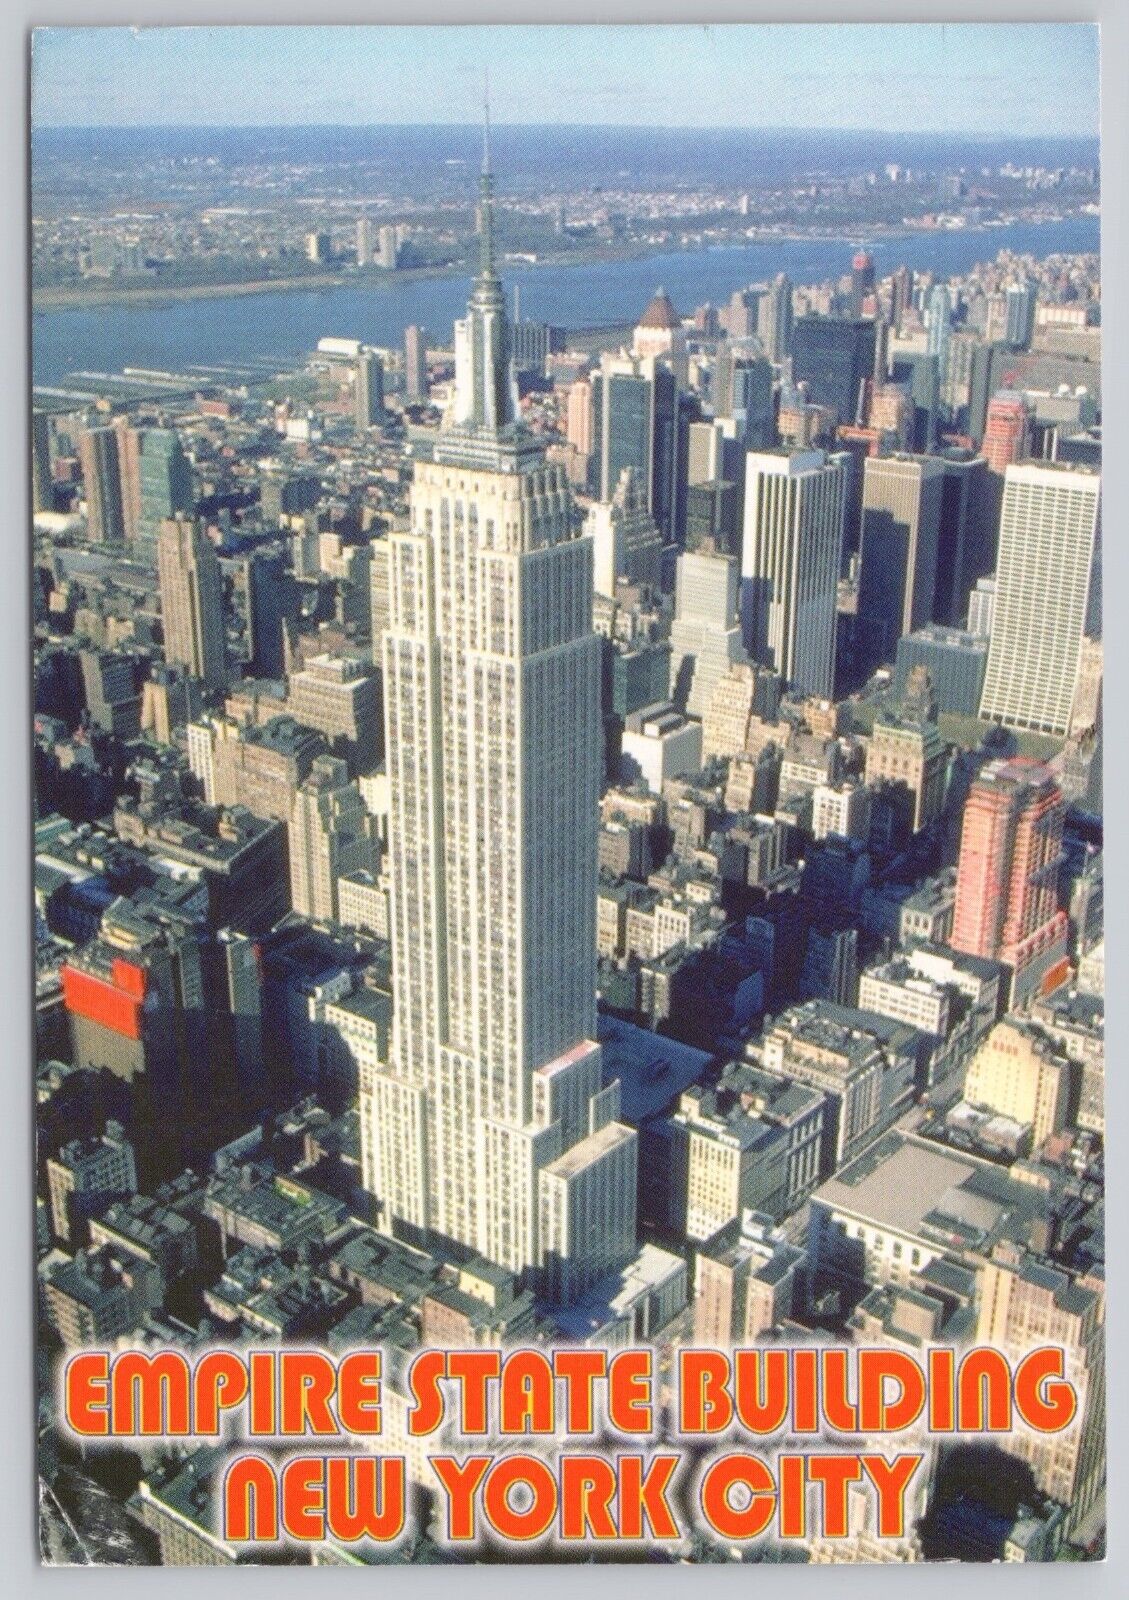 New York City New York, Empire State Building Aerial View, Vintage Postcard